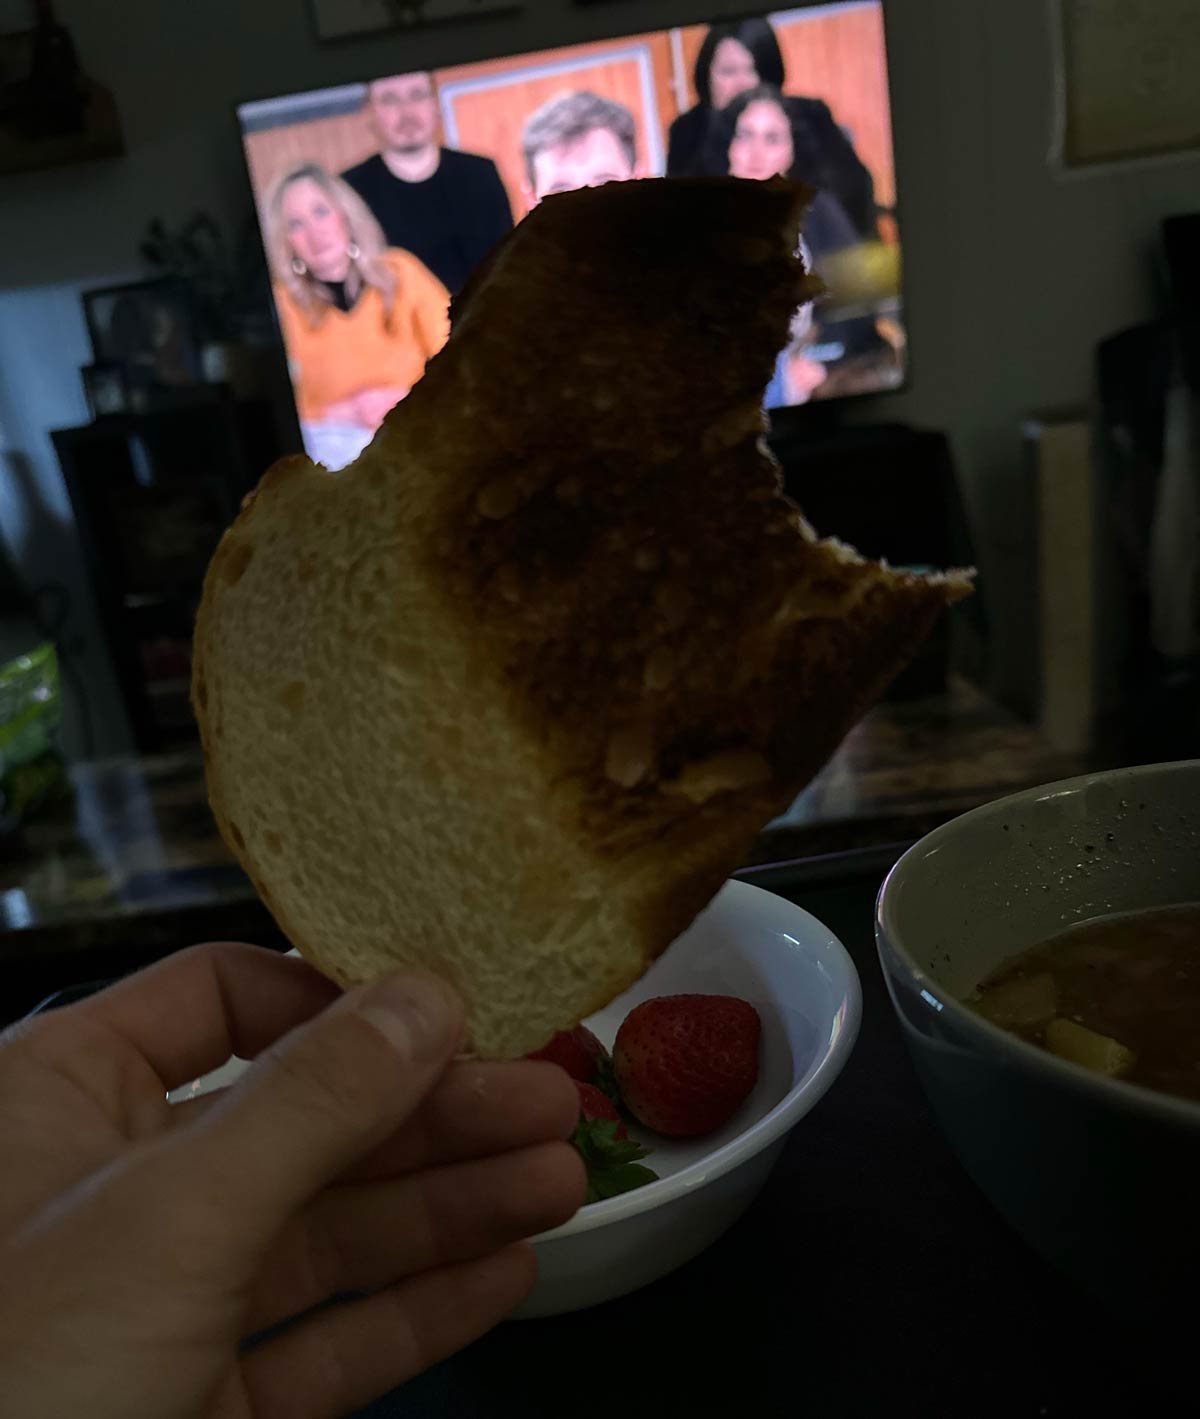 My girlfriend asked me if I wanted some toast, here’s what I got